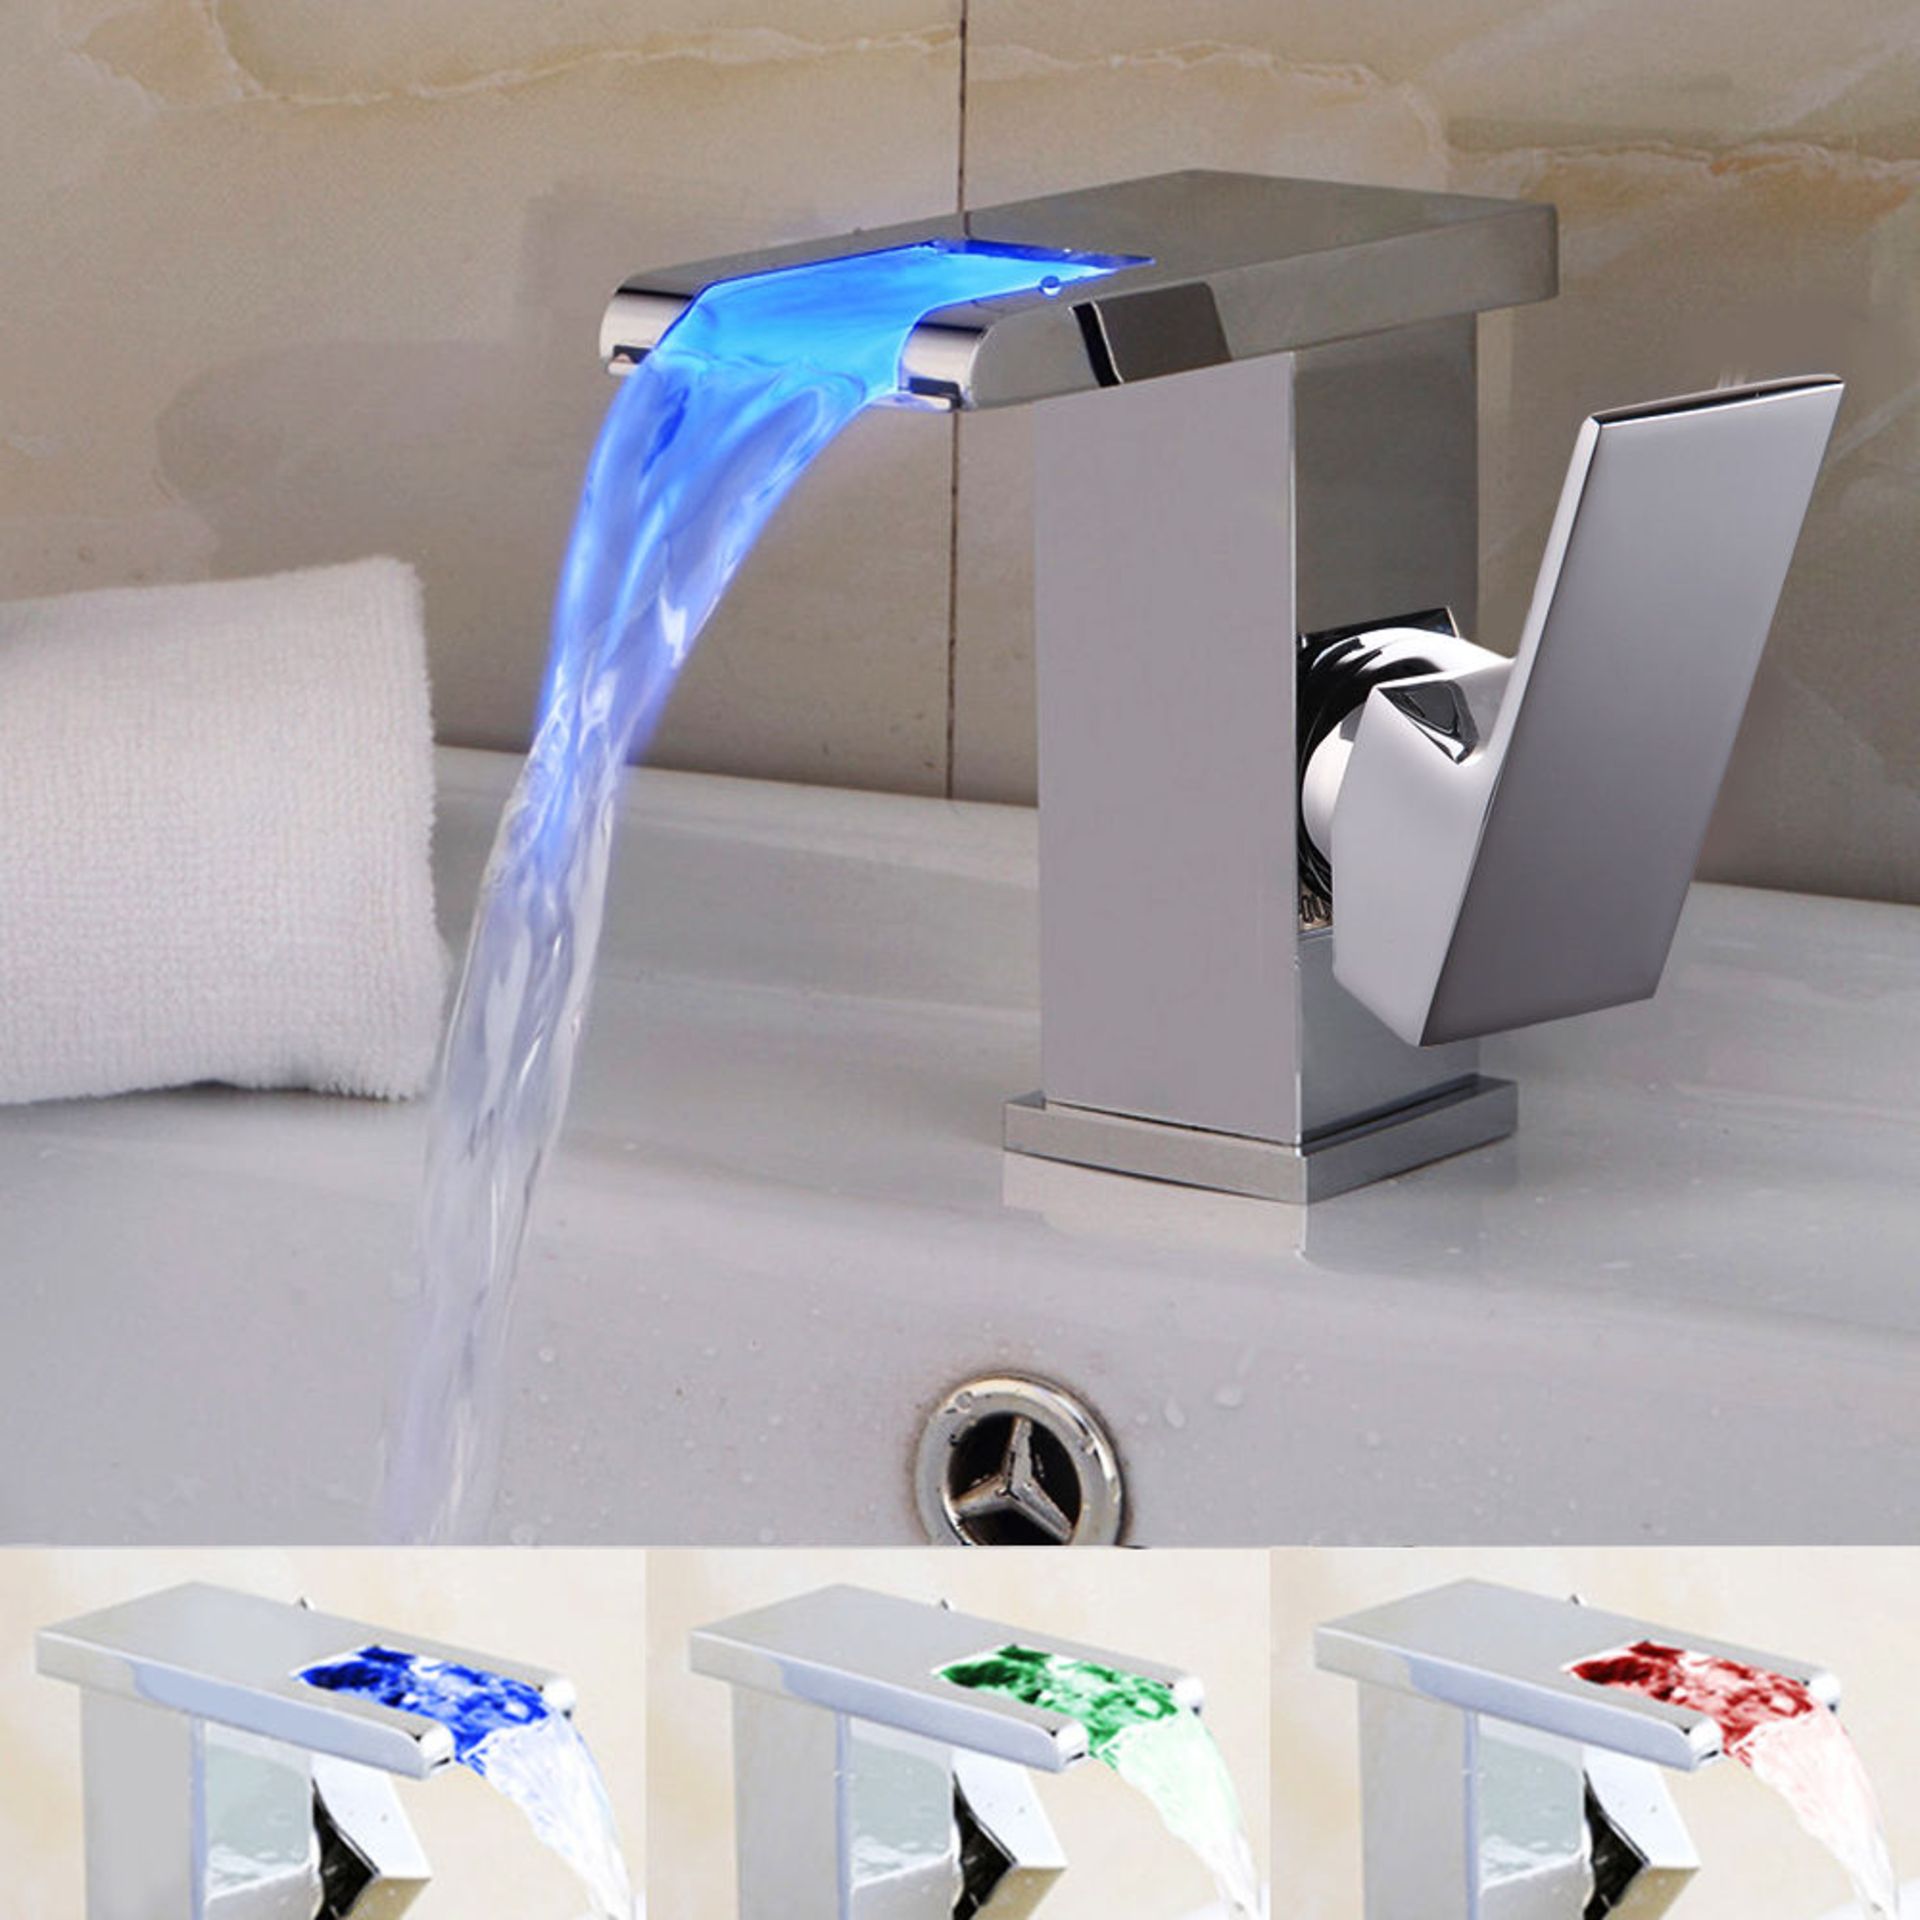 (P270) LED Waterfall Bathroom Basin Mixer Tap. RRP £229.99. Easy to install and clean. All copper